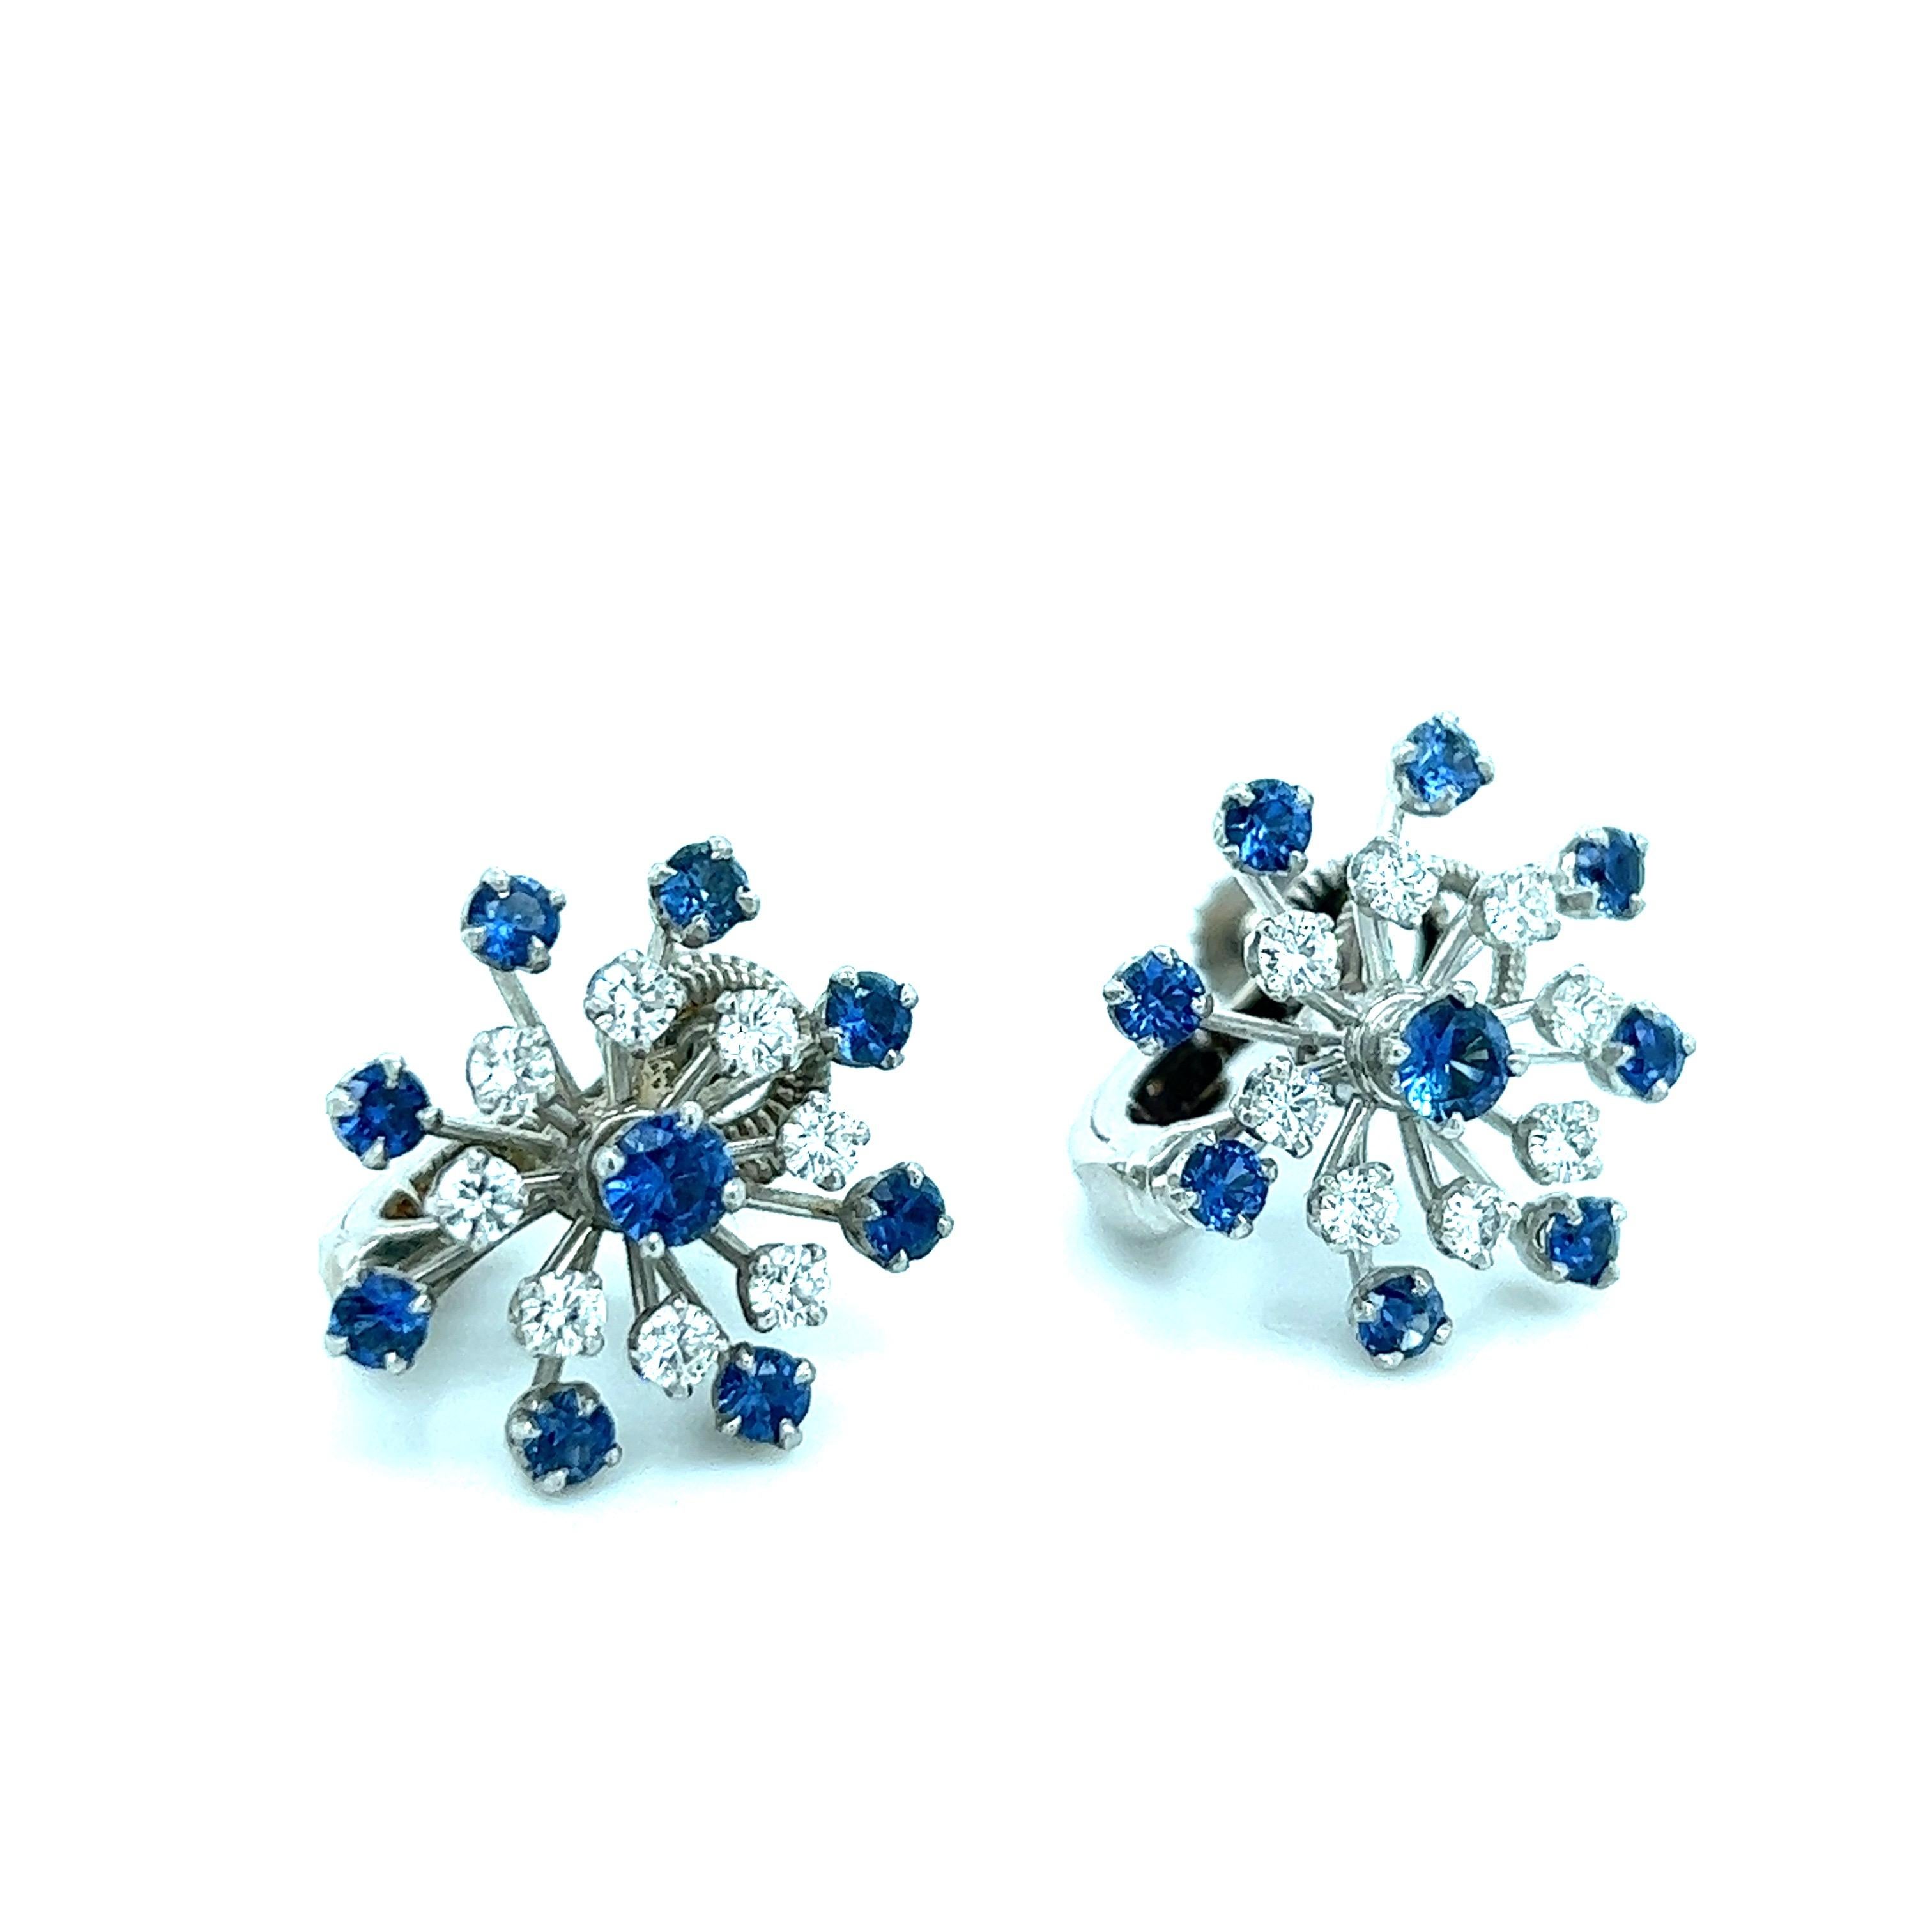 Oscar Heyman diamond sapphire snowflake earrings

Beautiful snowflake motif, round-cut diamonds of approximately 0.64 carat, round-cut sapphires of approximately 1.22 carats; marked 49592

Size: width 16 mm, length 17 mm
Total weight: 8.1 grams